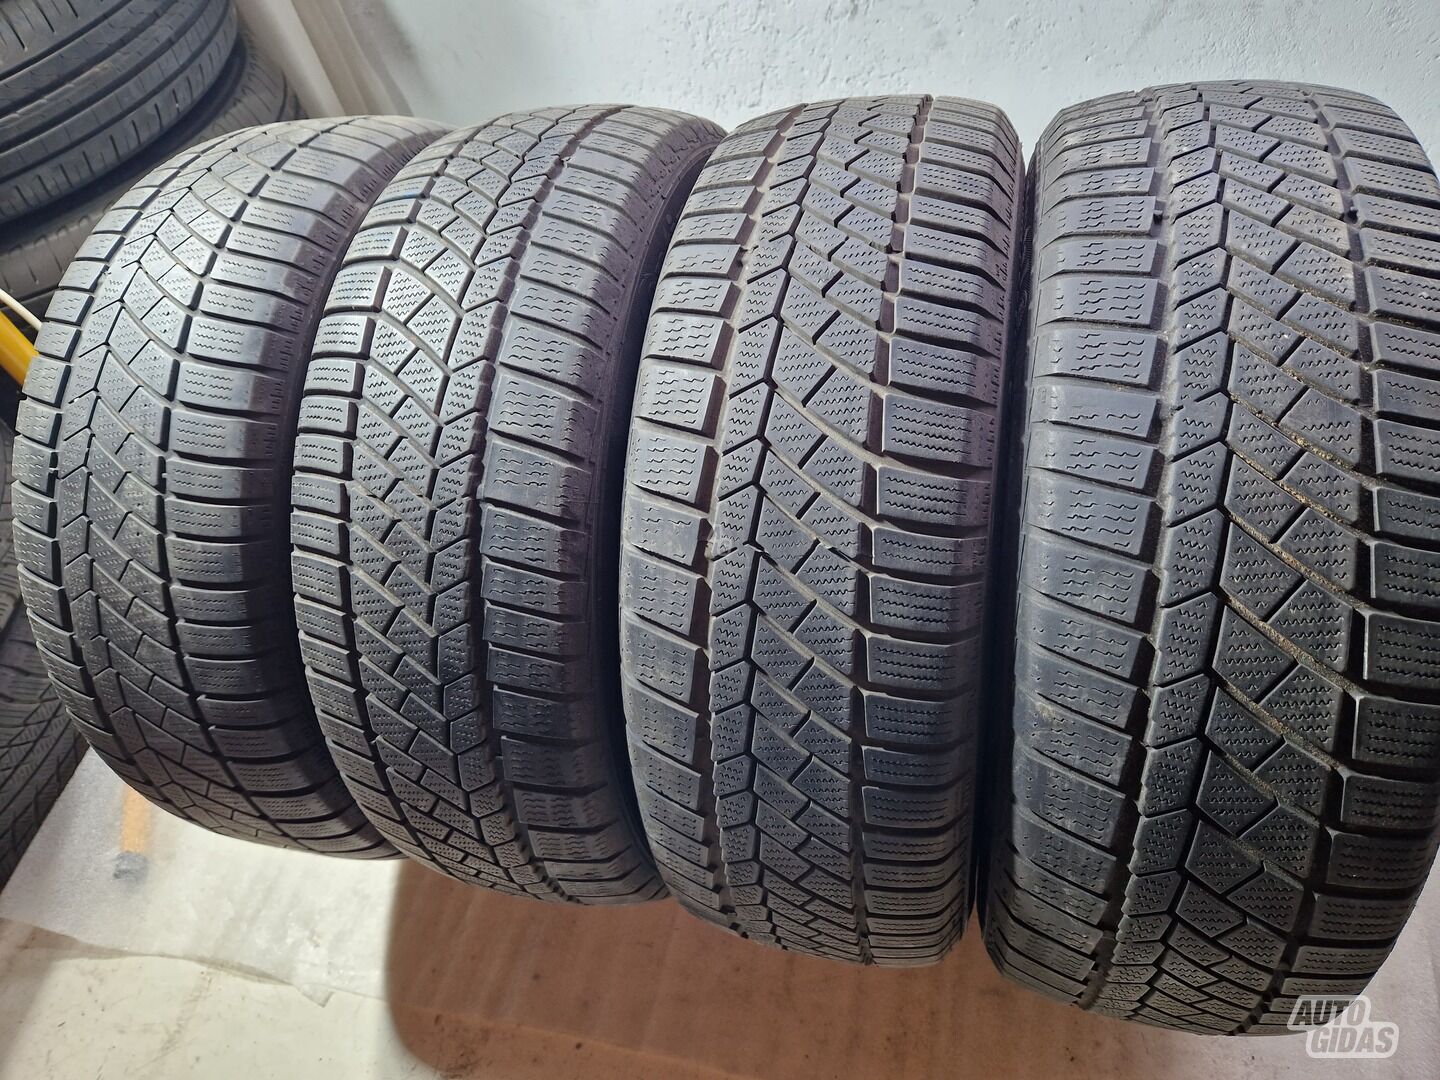 Continental 5-6mm R16 winter tyres passanger car